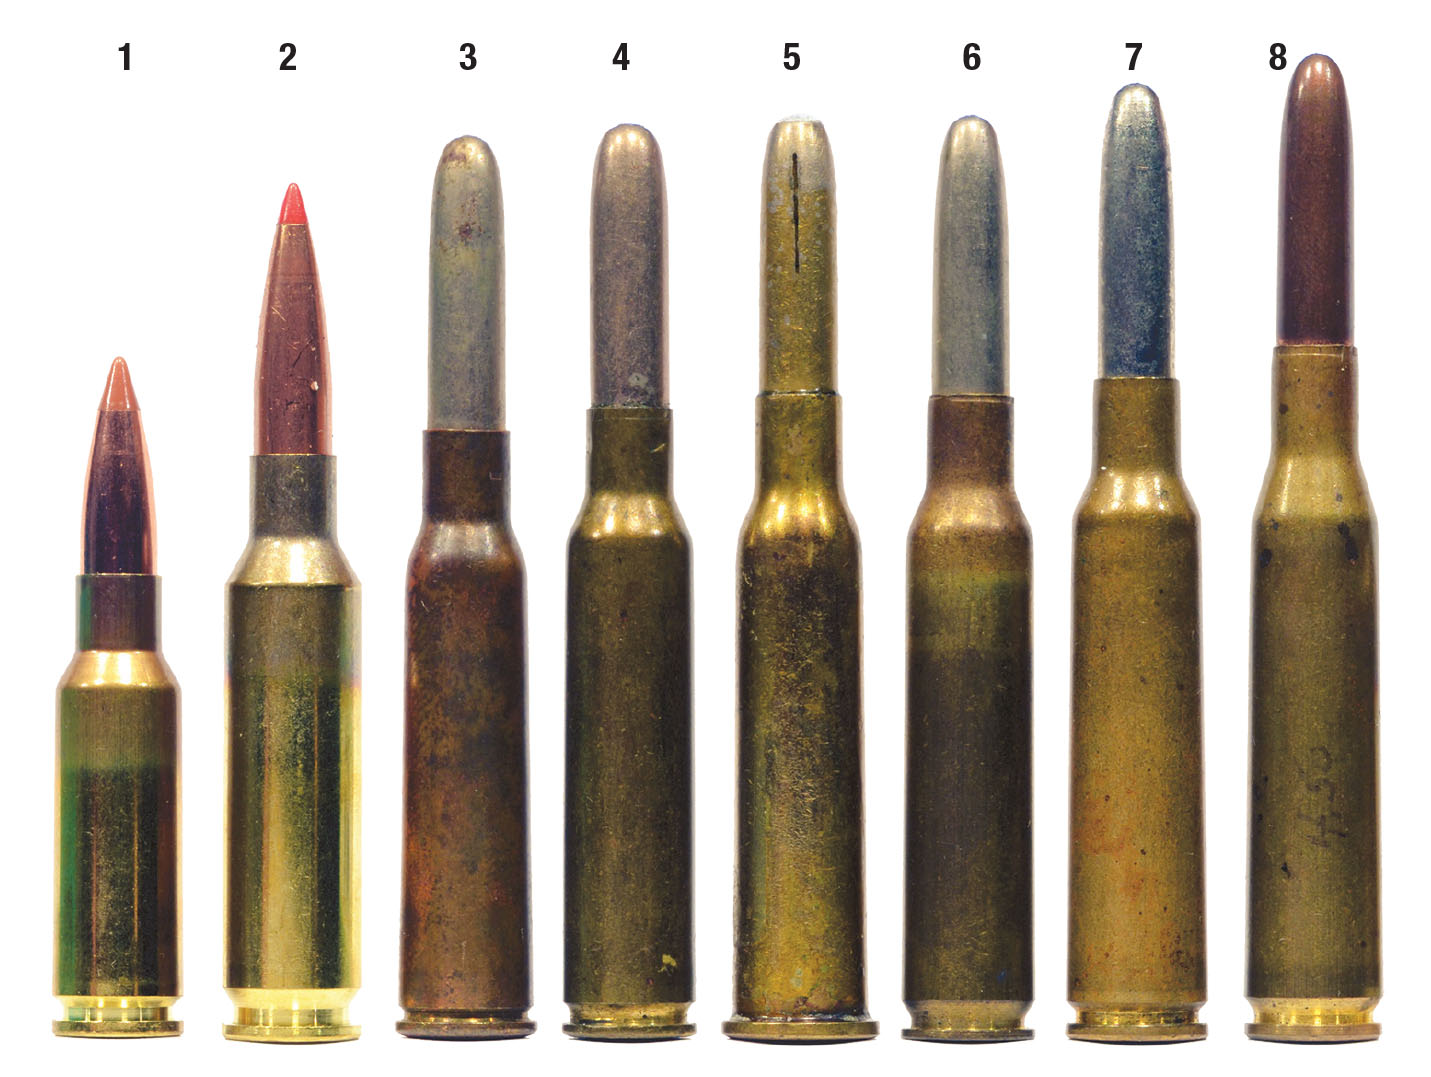 Old and new: The (1) 6.5 Grendel, (2) 6.5 Creedmoor, (3) 6.5 Arisaka, (4) 6.5 Carcano, (5) 6.5 Dutch Mannlicher, (6) 6.5x54 Mannlicher-Schönauer (Greek), (7) 6.5x55 Swedish and (8) 6.5 Portuguese. Although, on paper, the new cartridges will outperform the old, the original heavy-for-caliber bullets provided tremendous penetration.